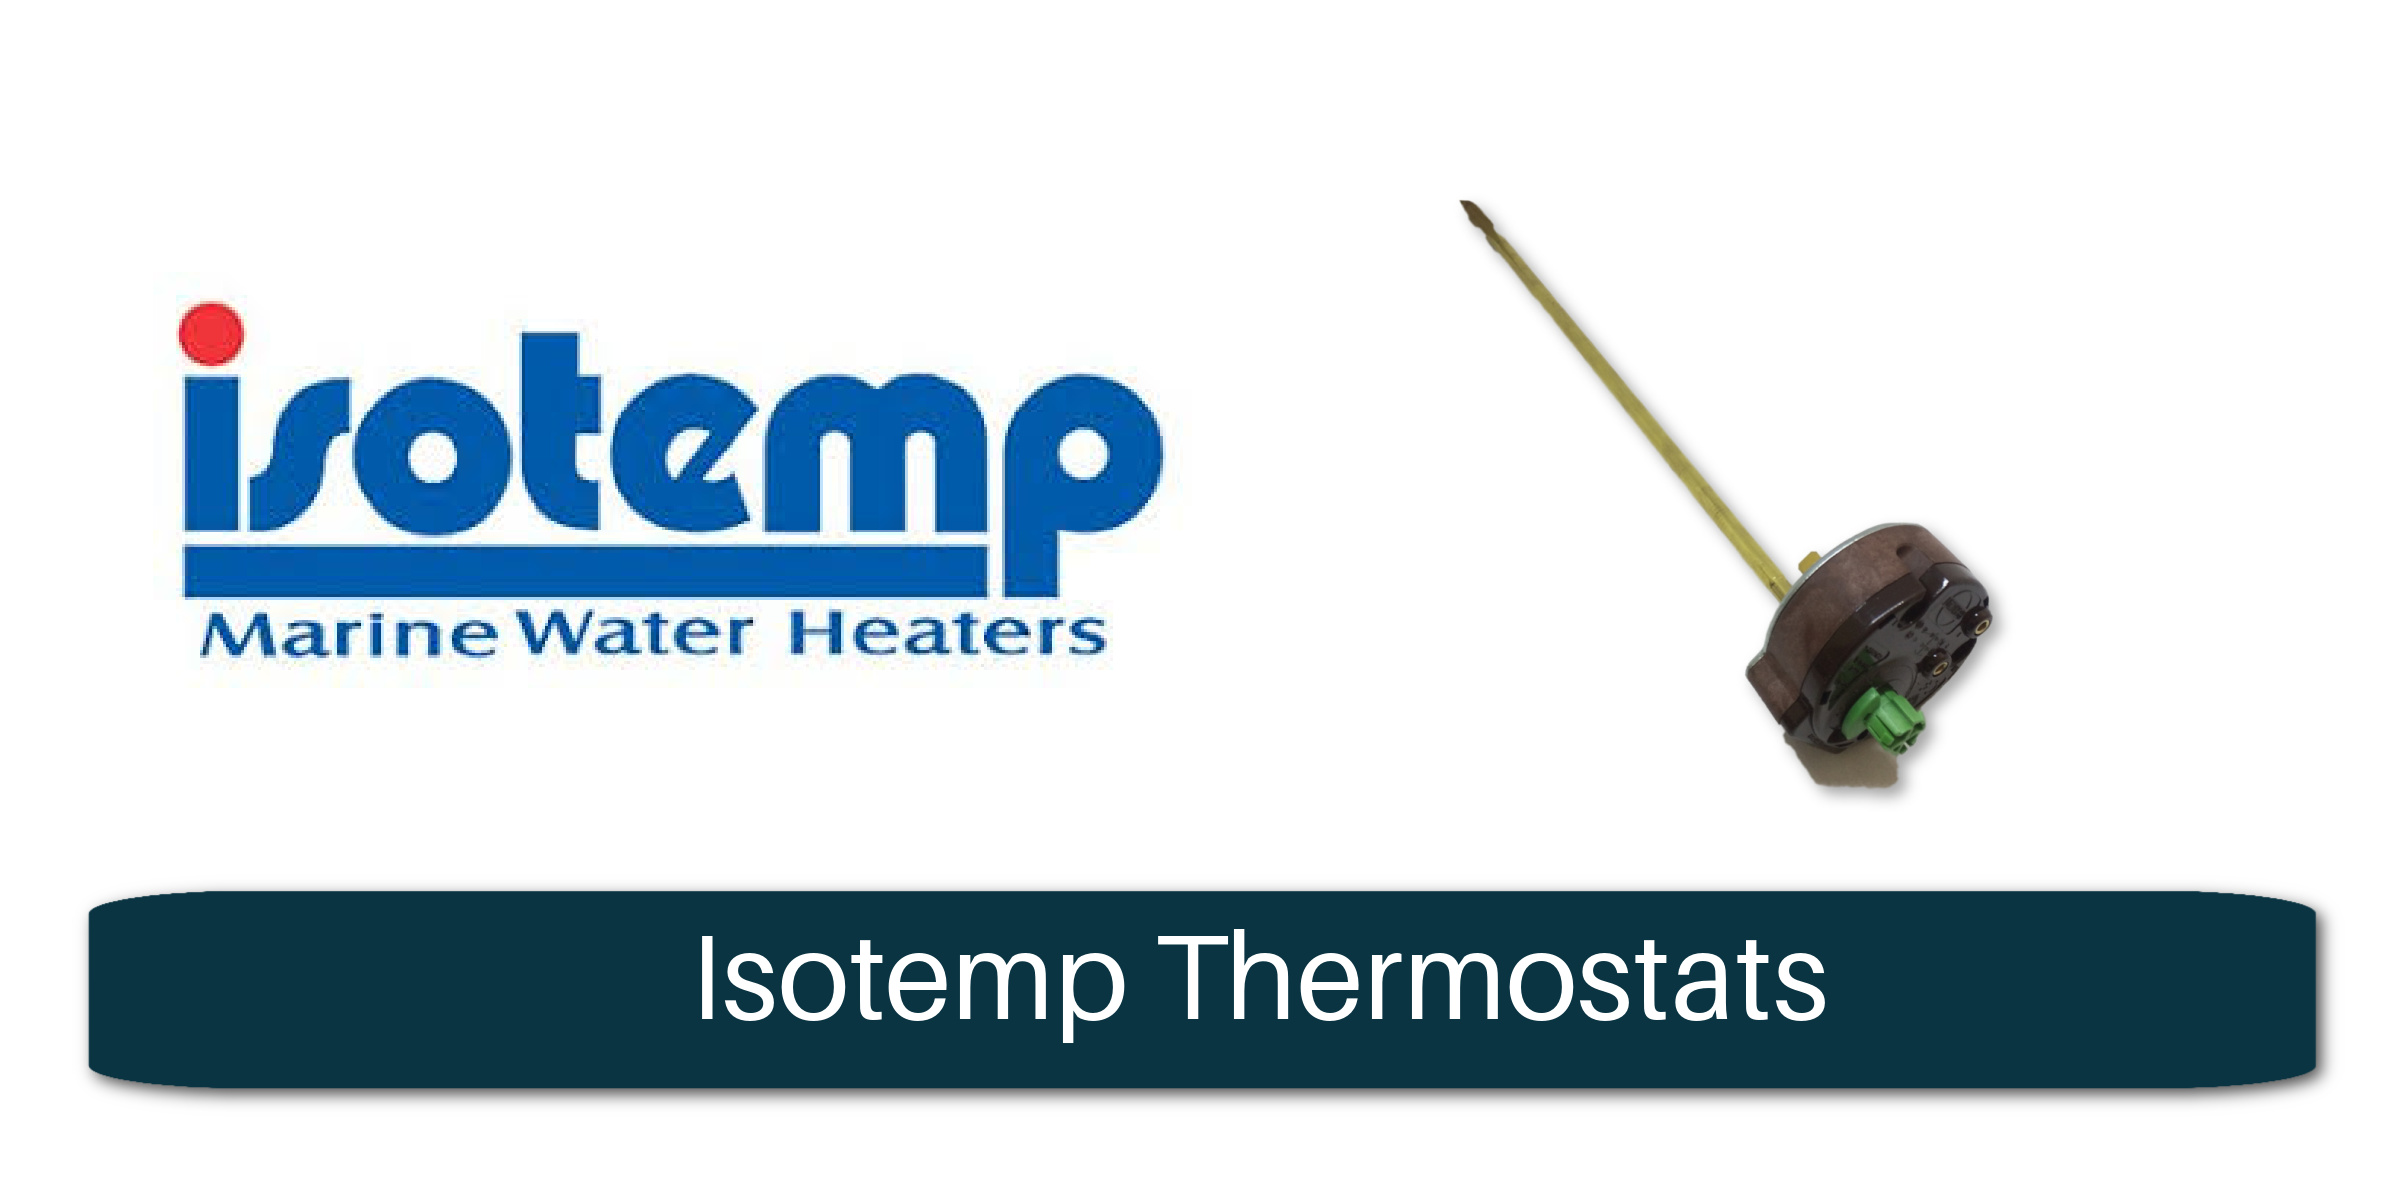 Isotemp Thermostats